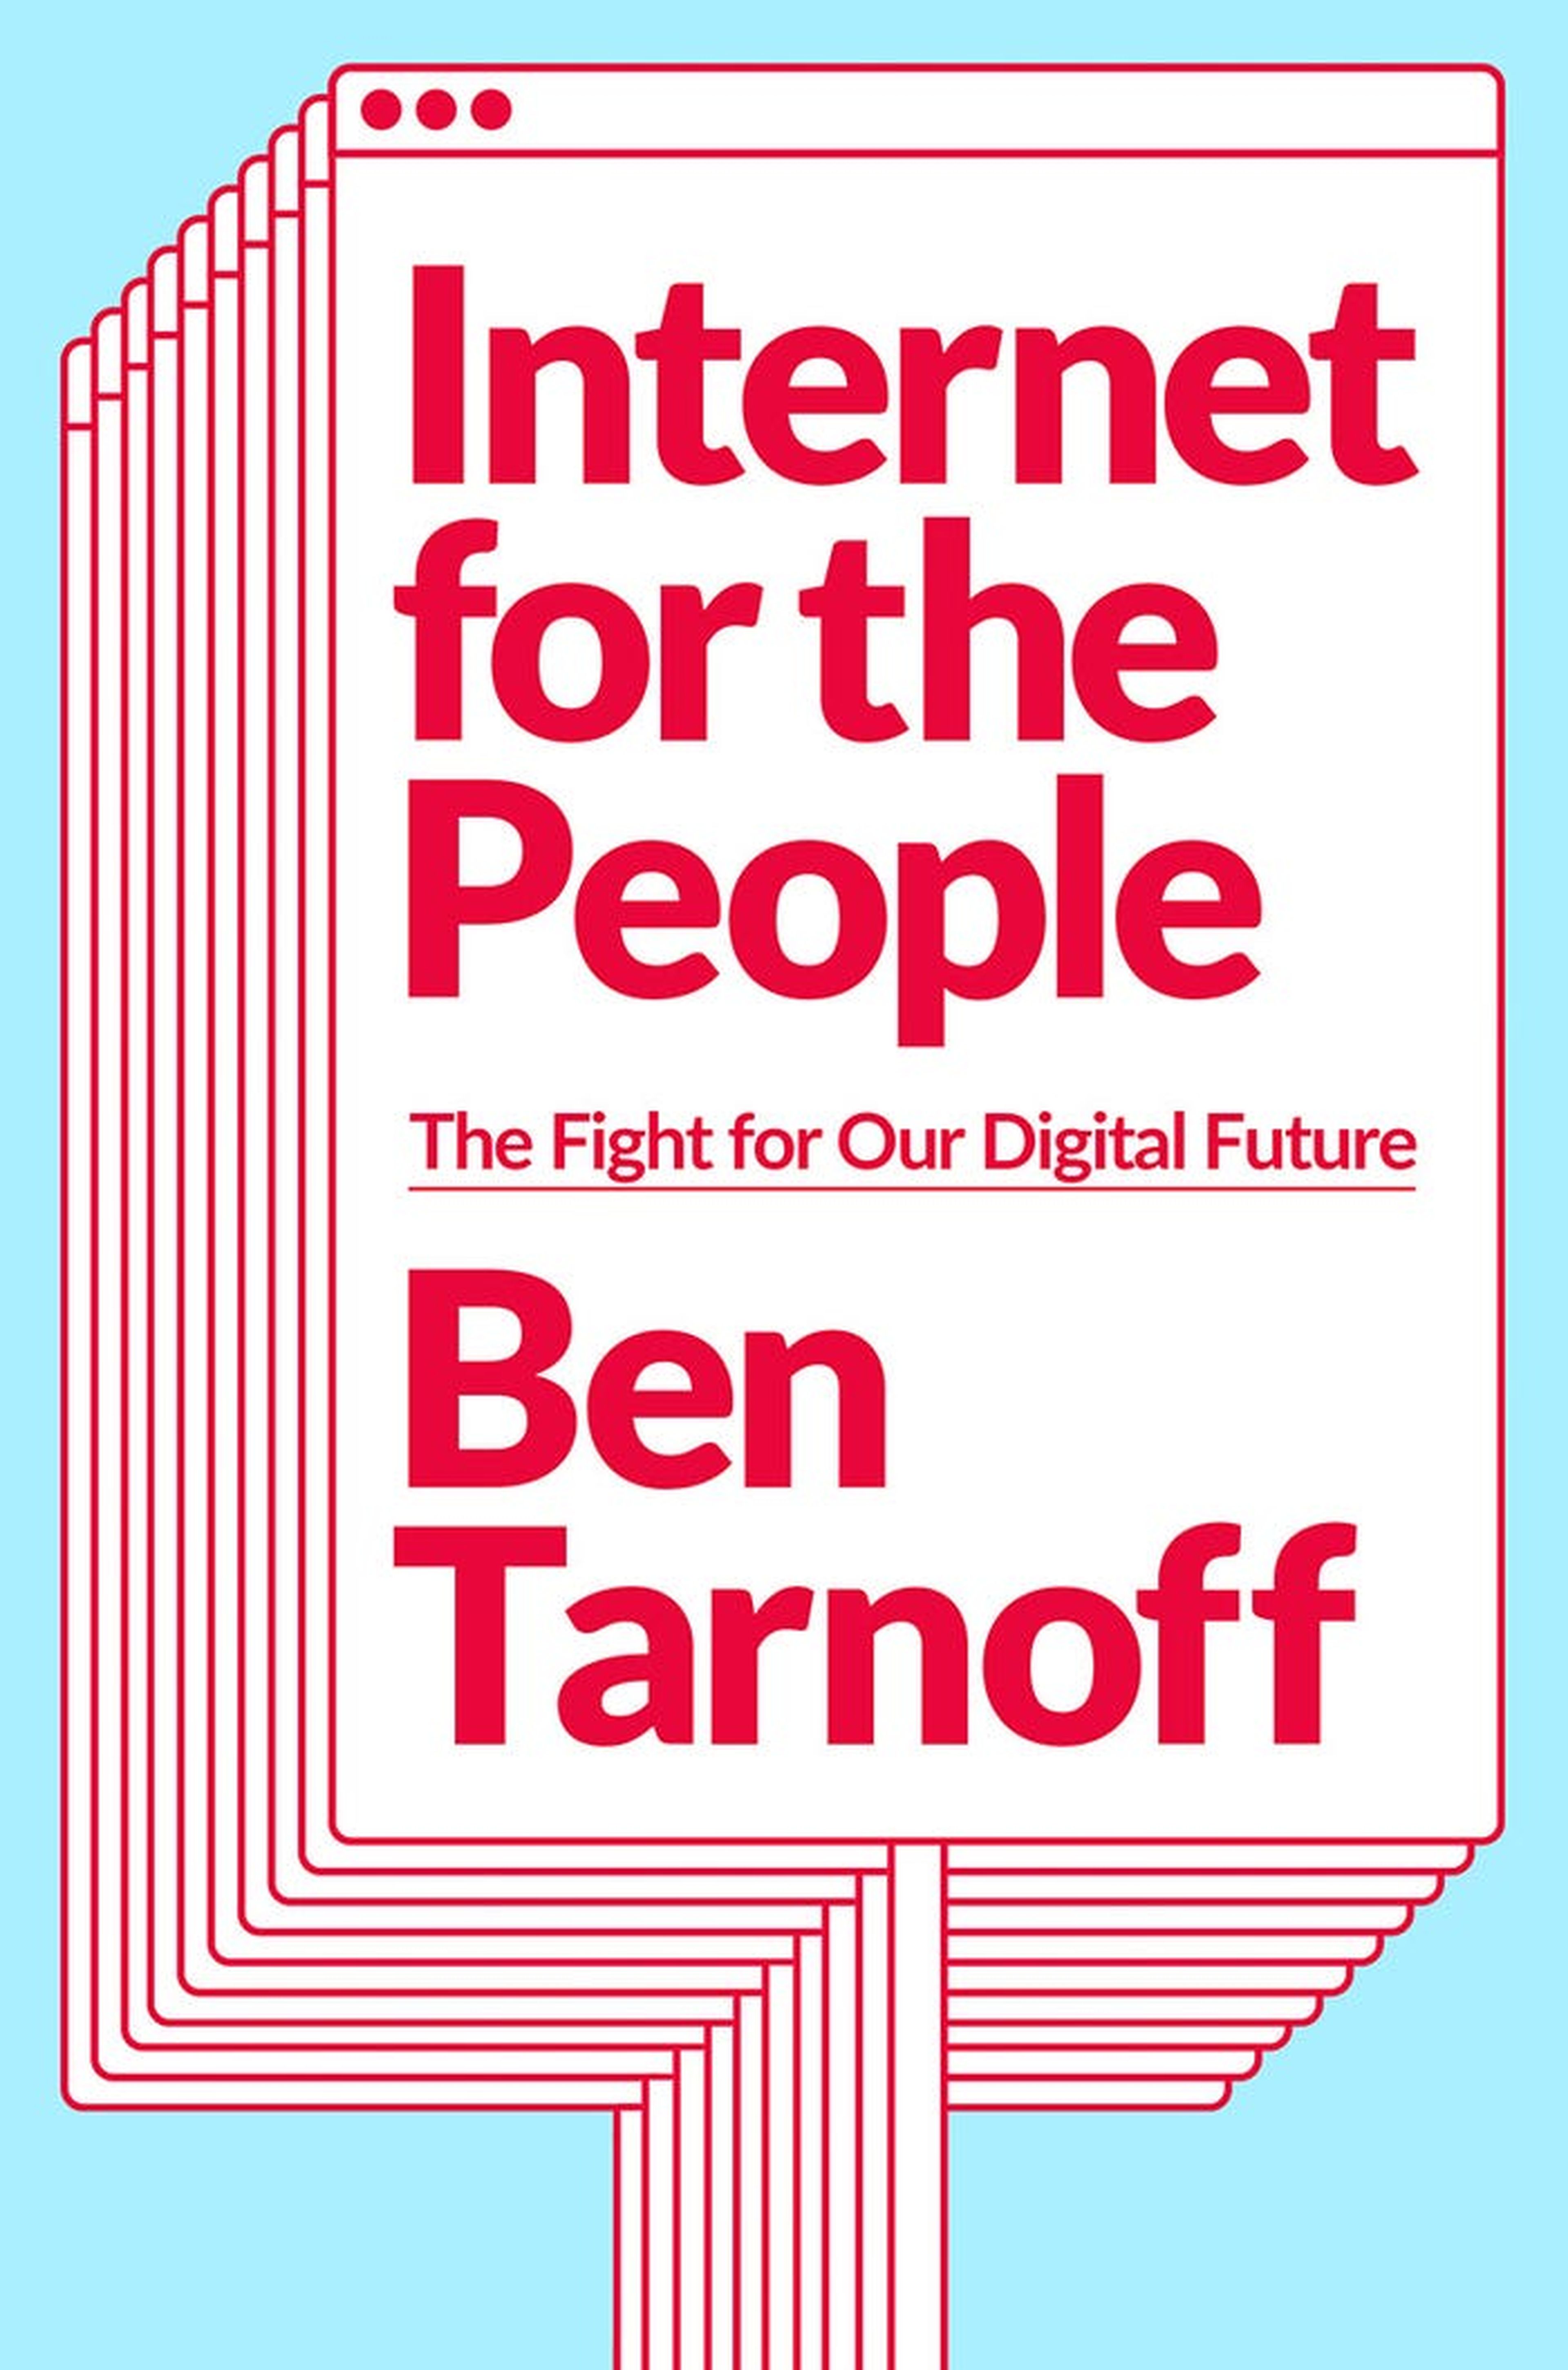 Internet for the People.